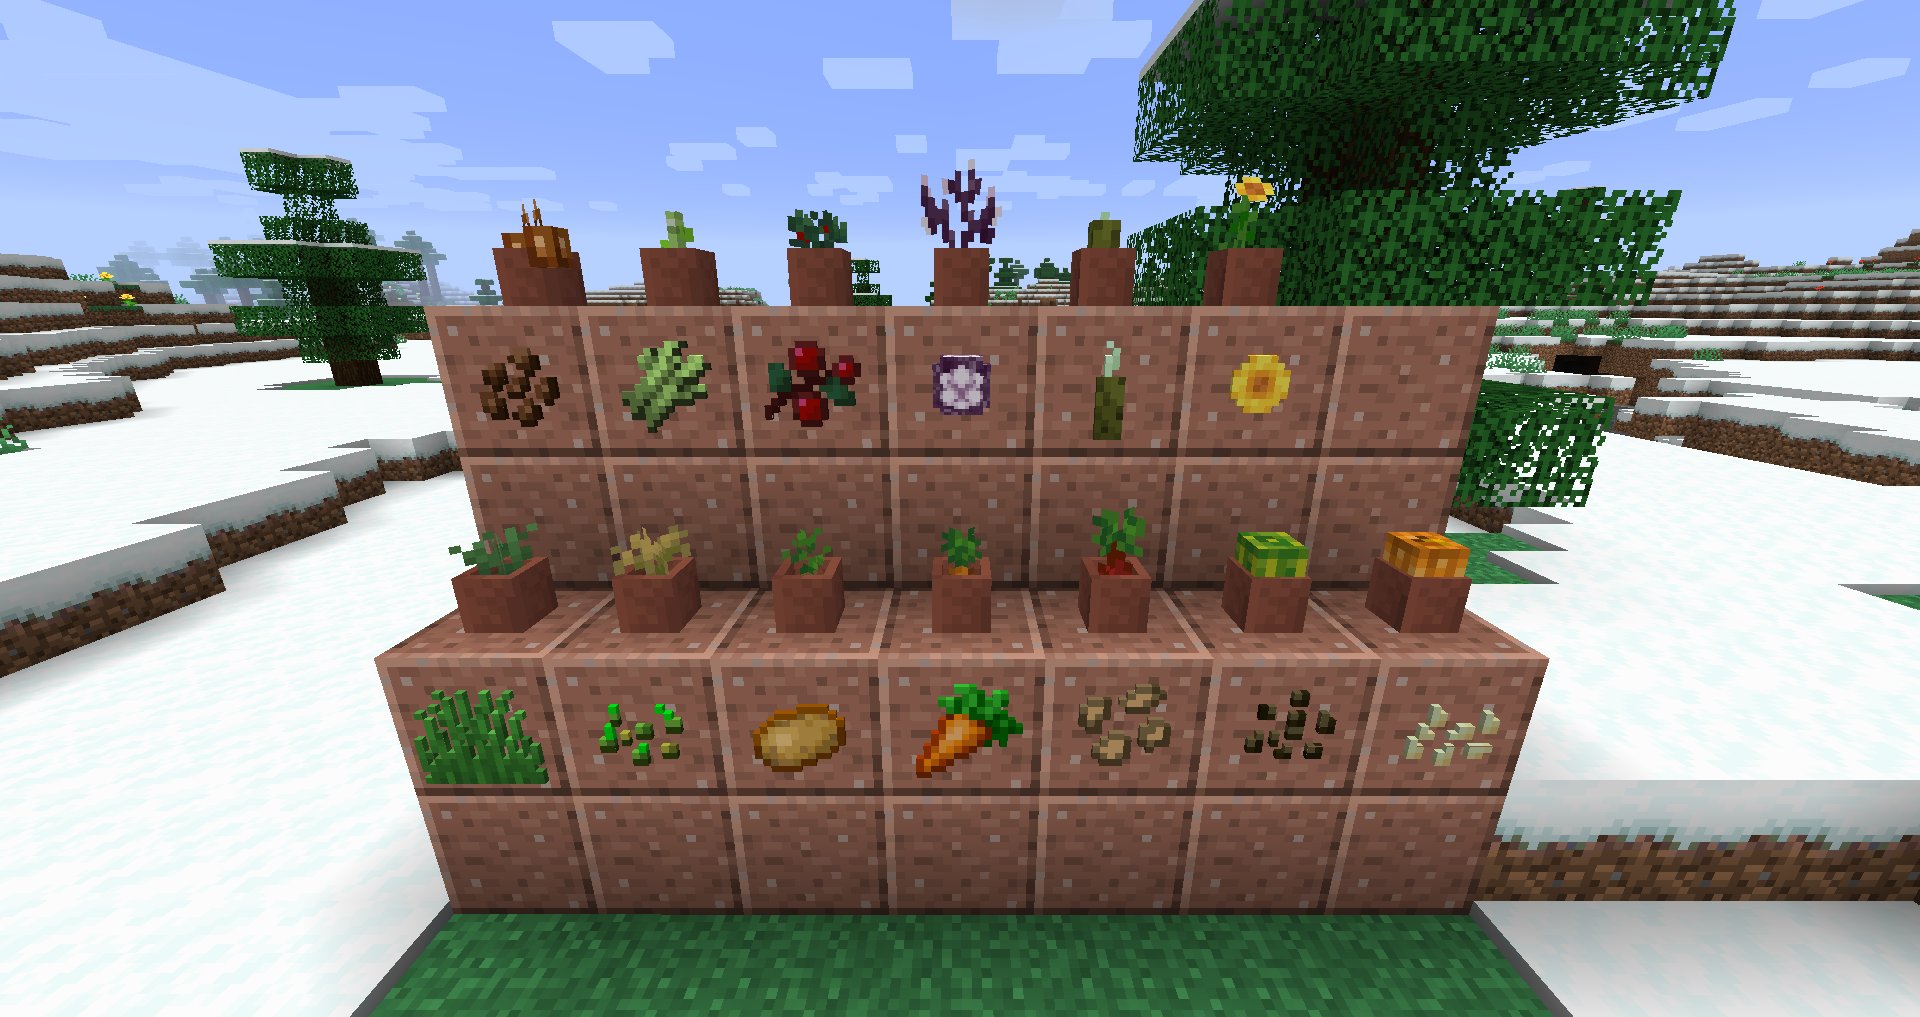 Violet Moon on Twitter: "New Quark Feature: More Potted Plants. You can now  add these 13 new plants to flower pots. https://t.co/4DV8gdJd01" / Twitter